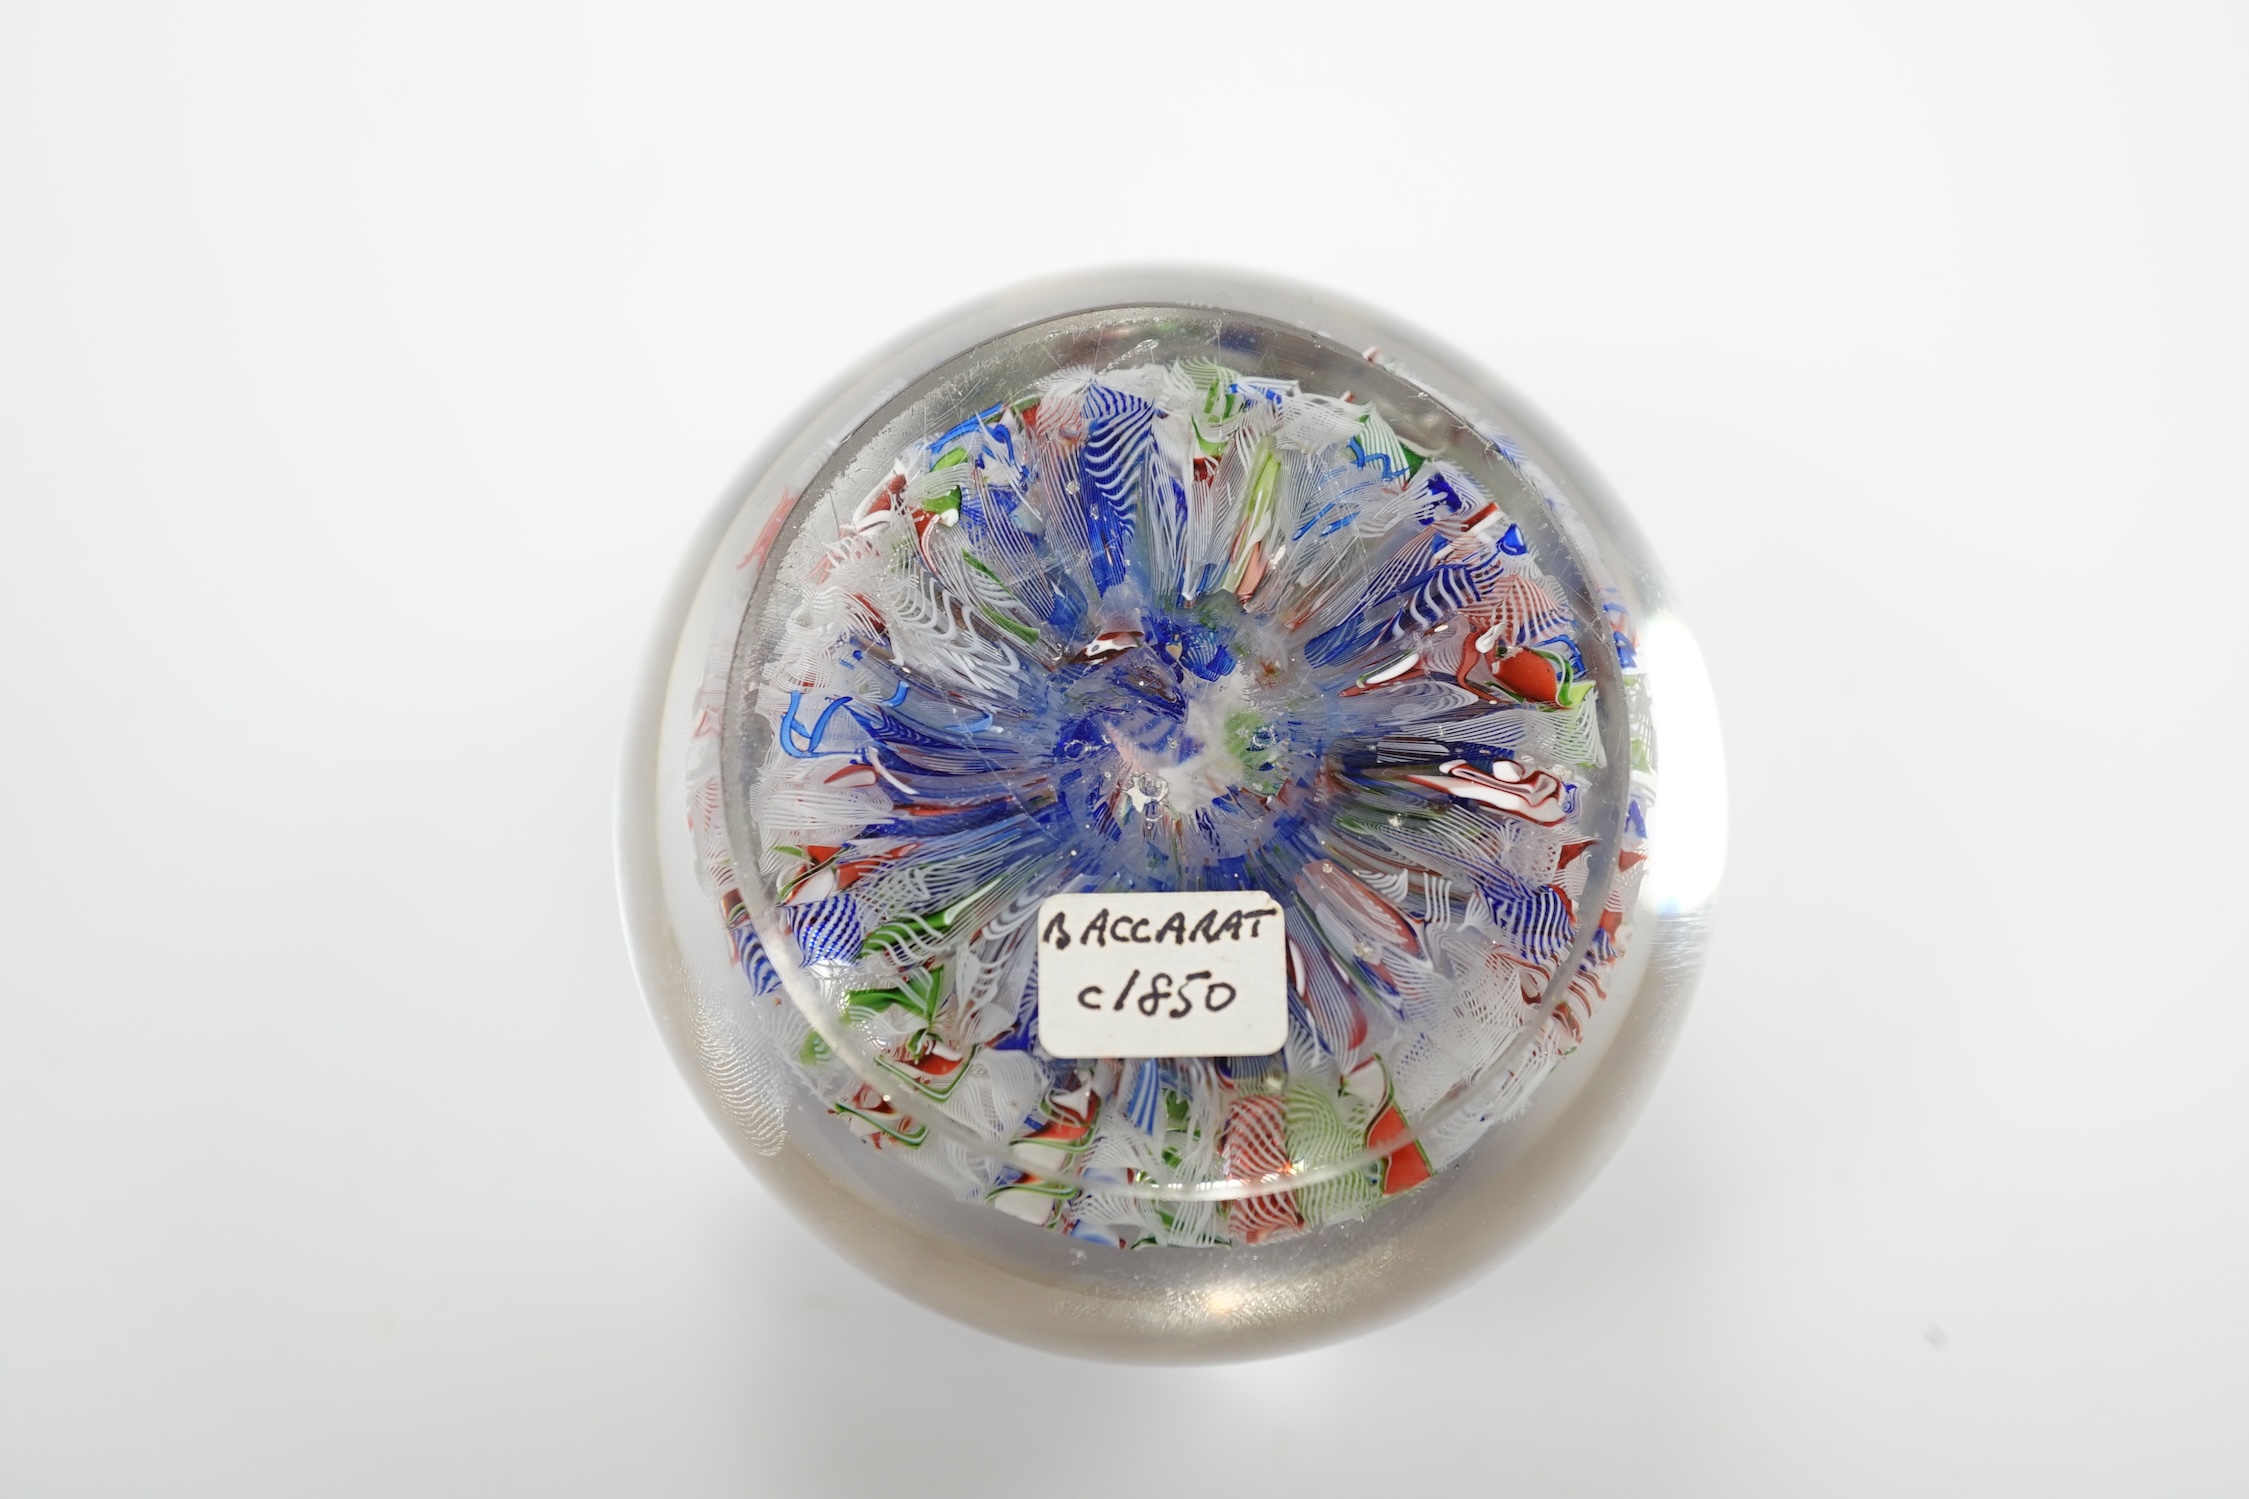 A Baccarat scrambled glass paperweight, 7.5cm in diameter - Image 3 of 3